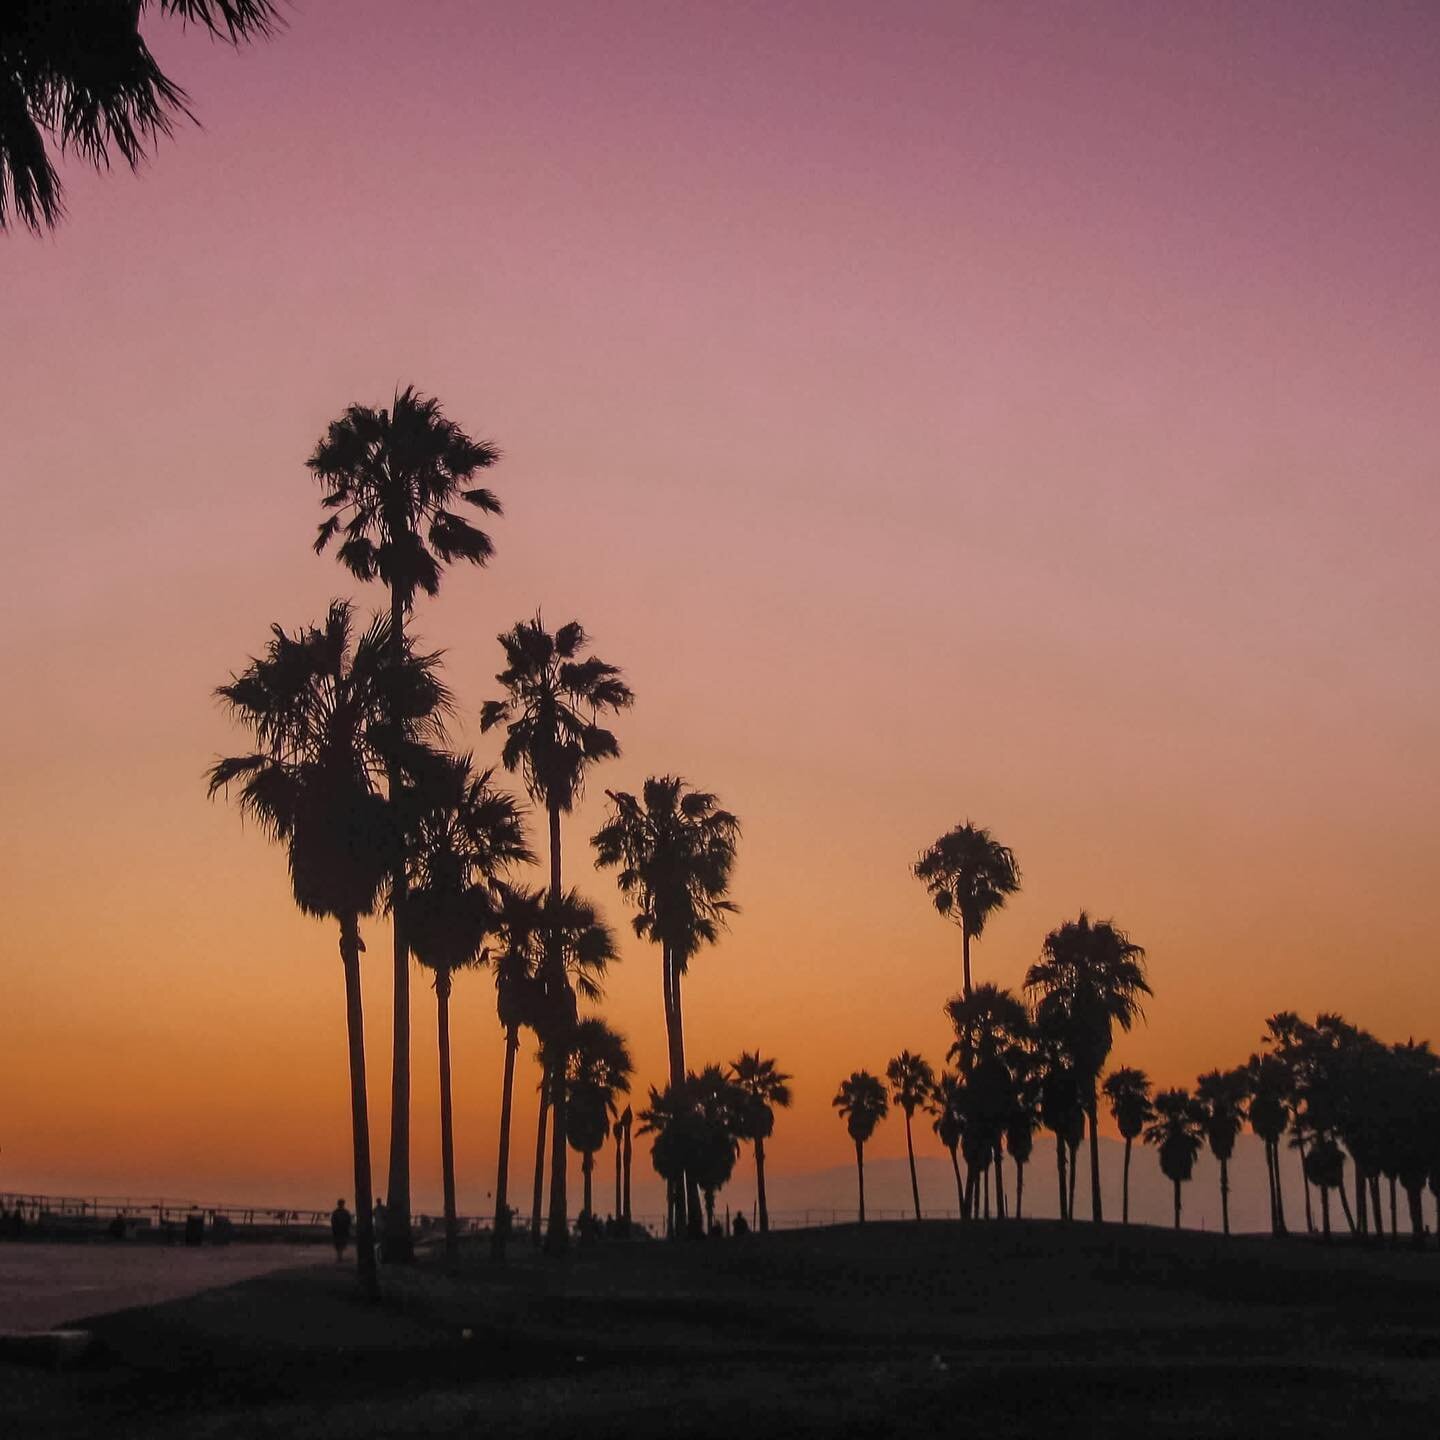 Check out the best things to do around Los Angeles from Hollywood to Malibu! Link in bio 🌴 #roadjesstravels #losangeles #la #california #hollywood #malibu #venicebeach #beverlyhills #travel #palmtrees #beach